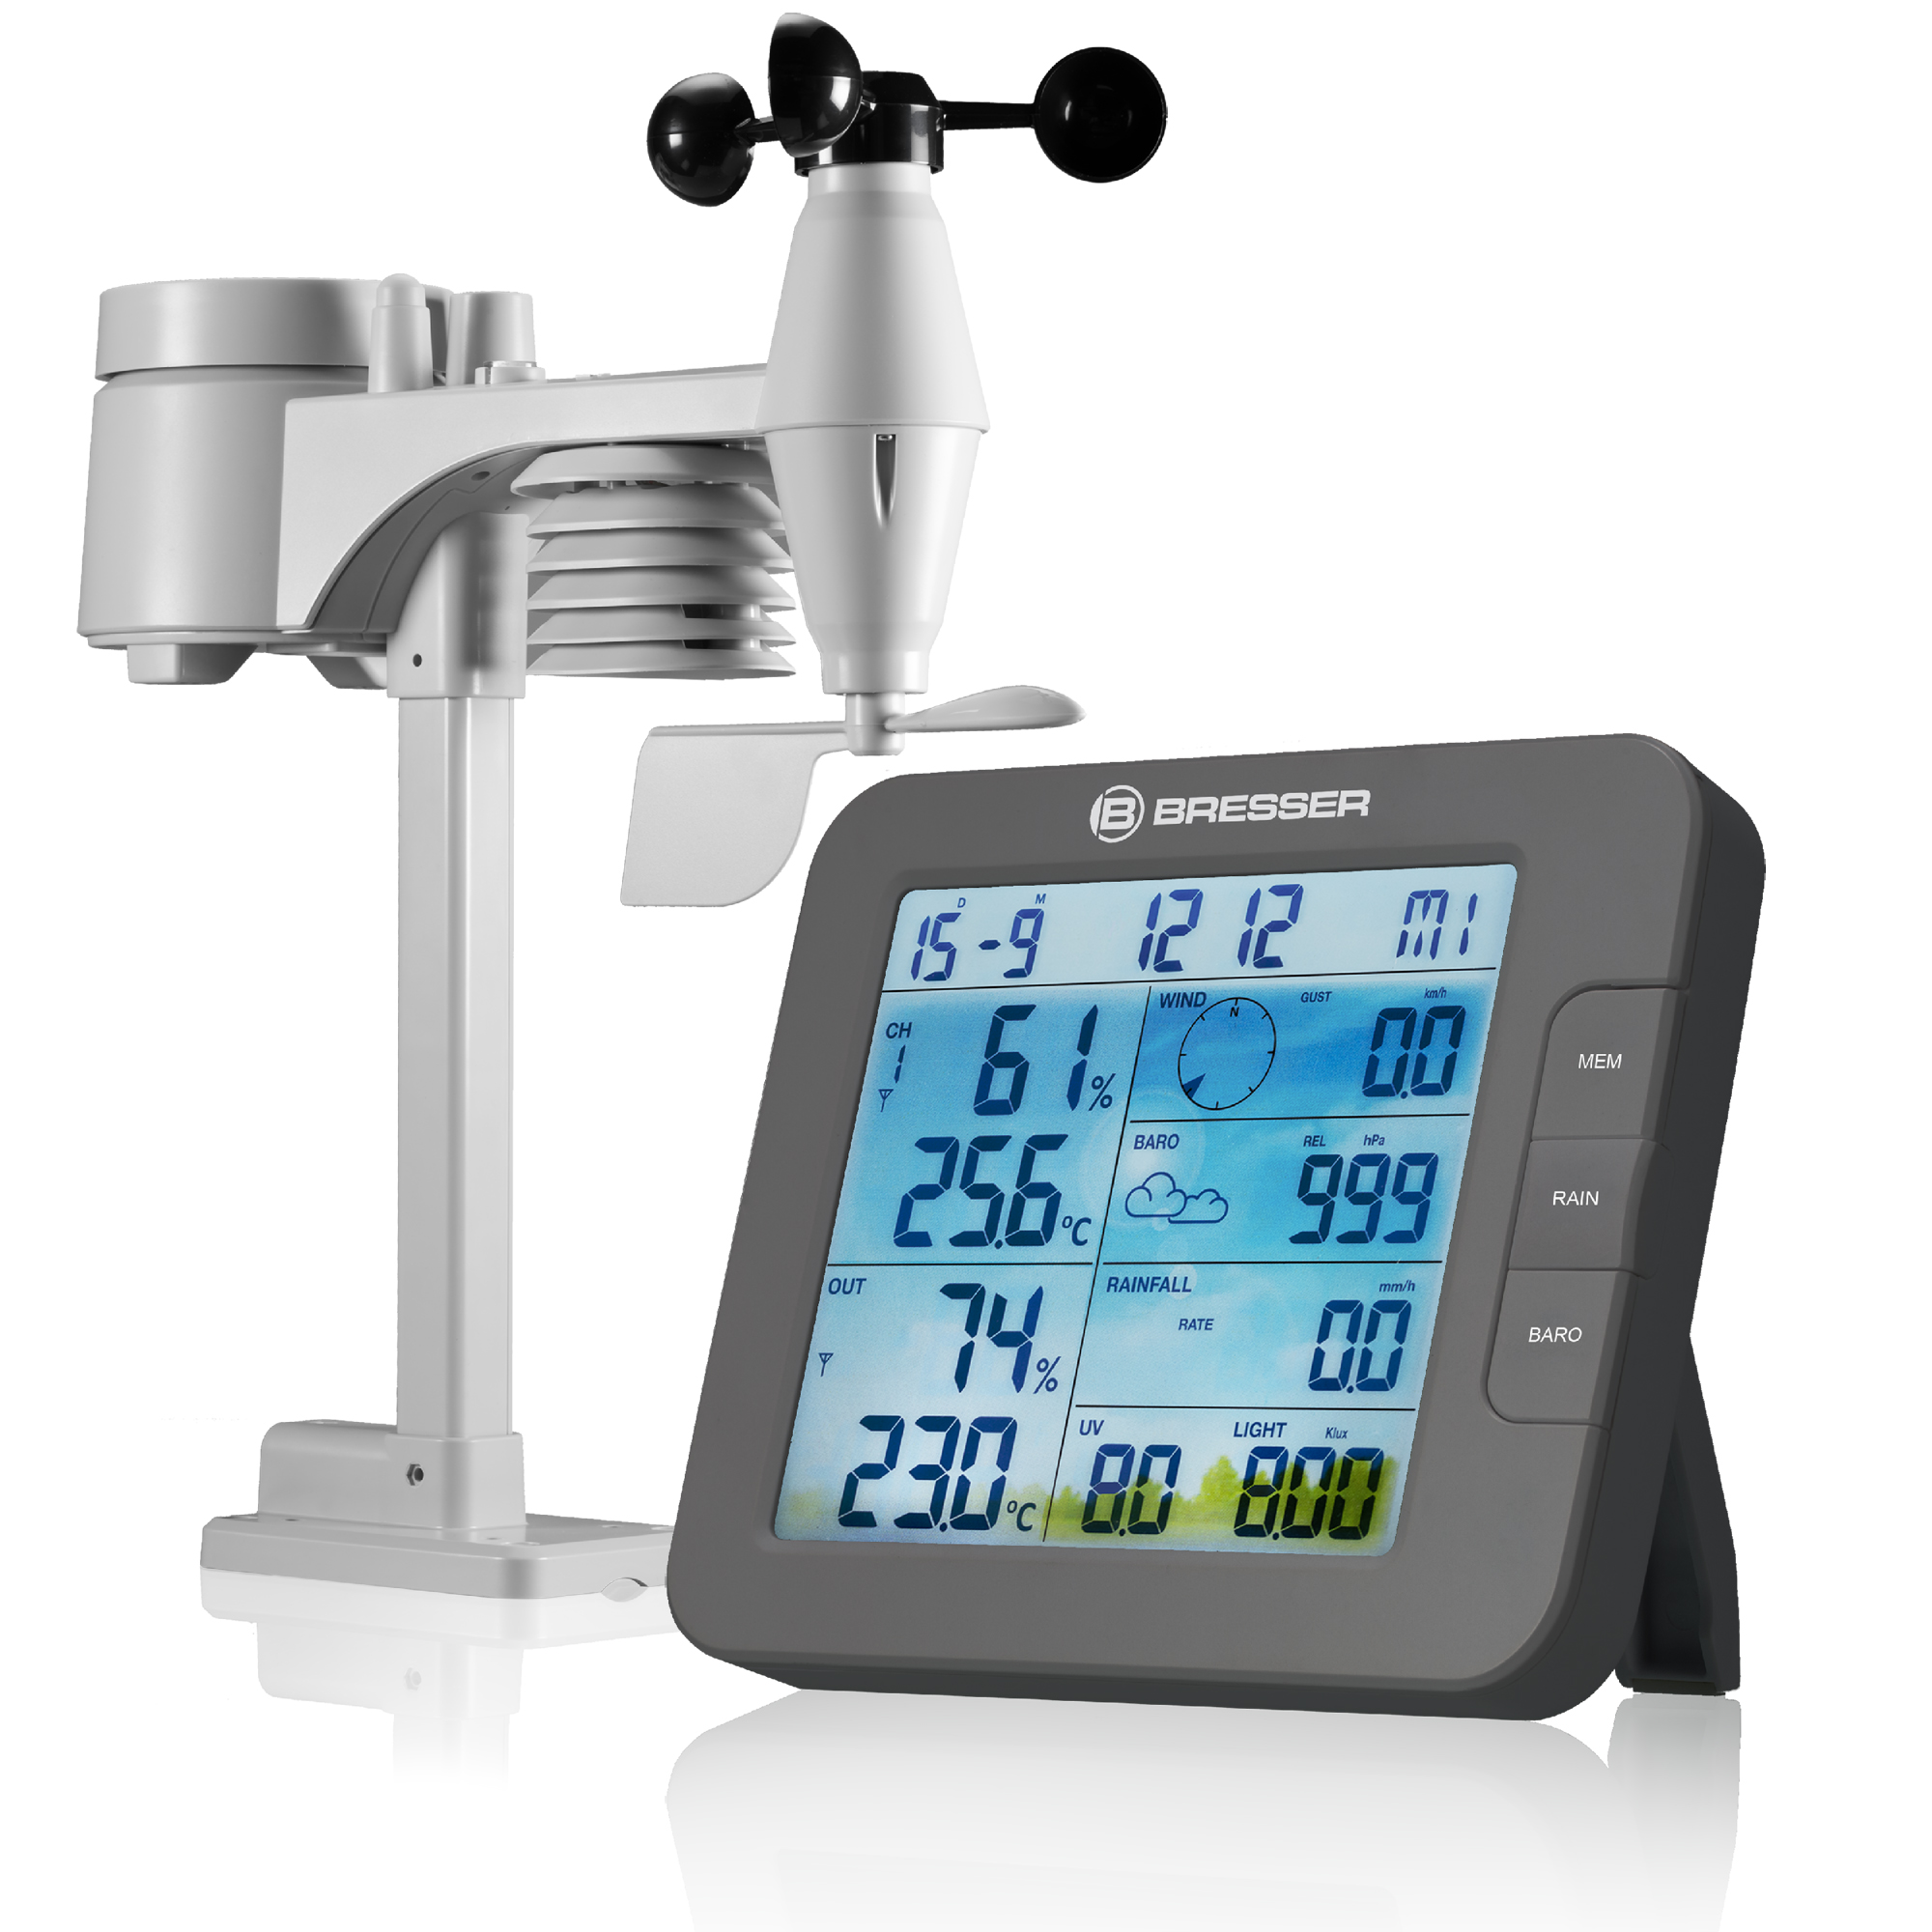 BRESSER 7-in-1 ClimateConnect Tuya Smart Home Weather Station